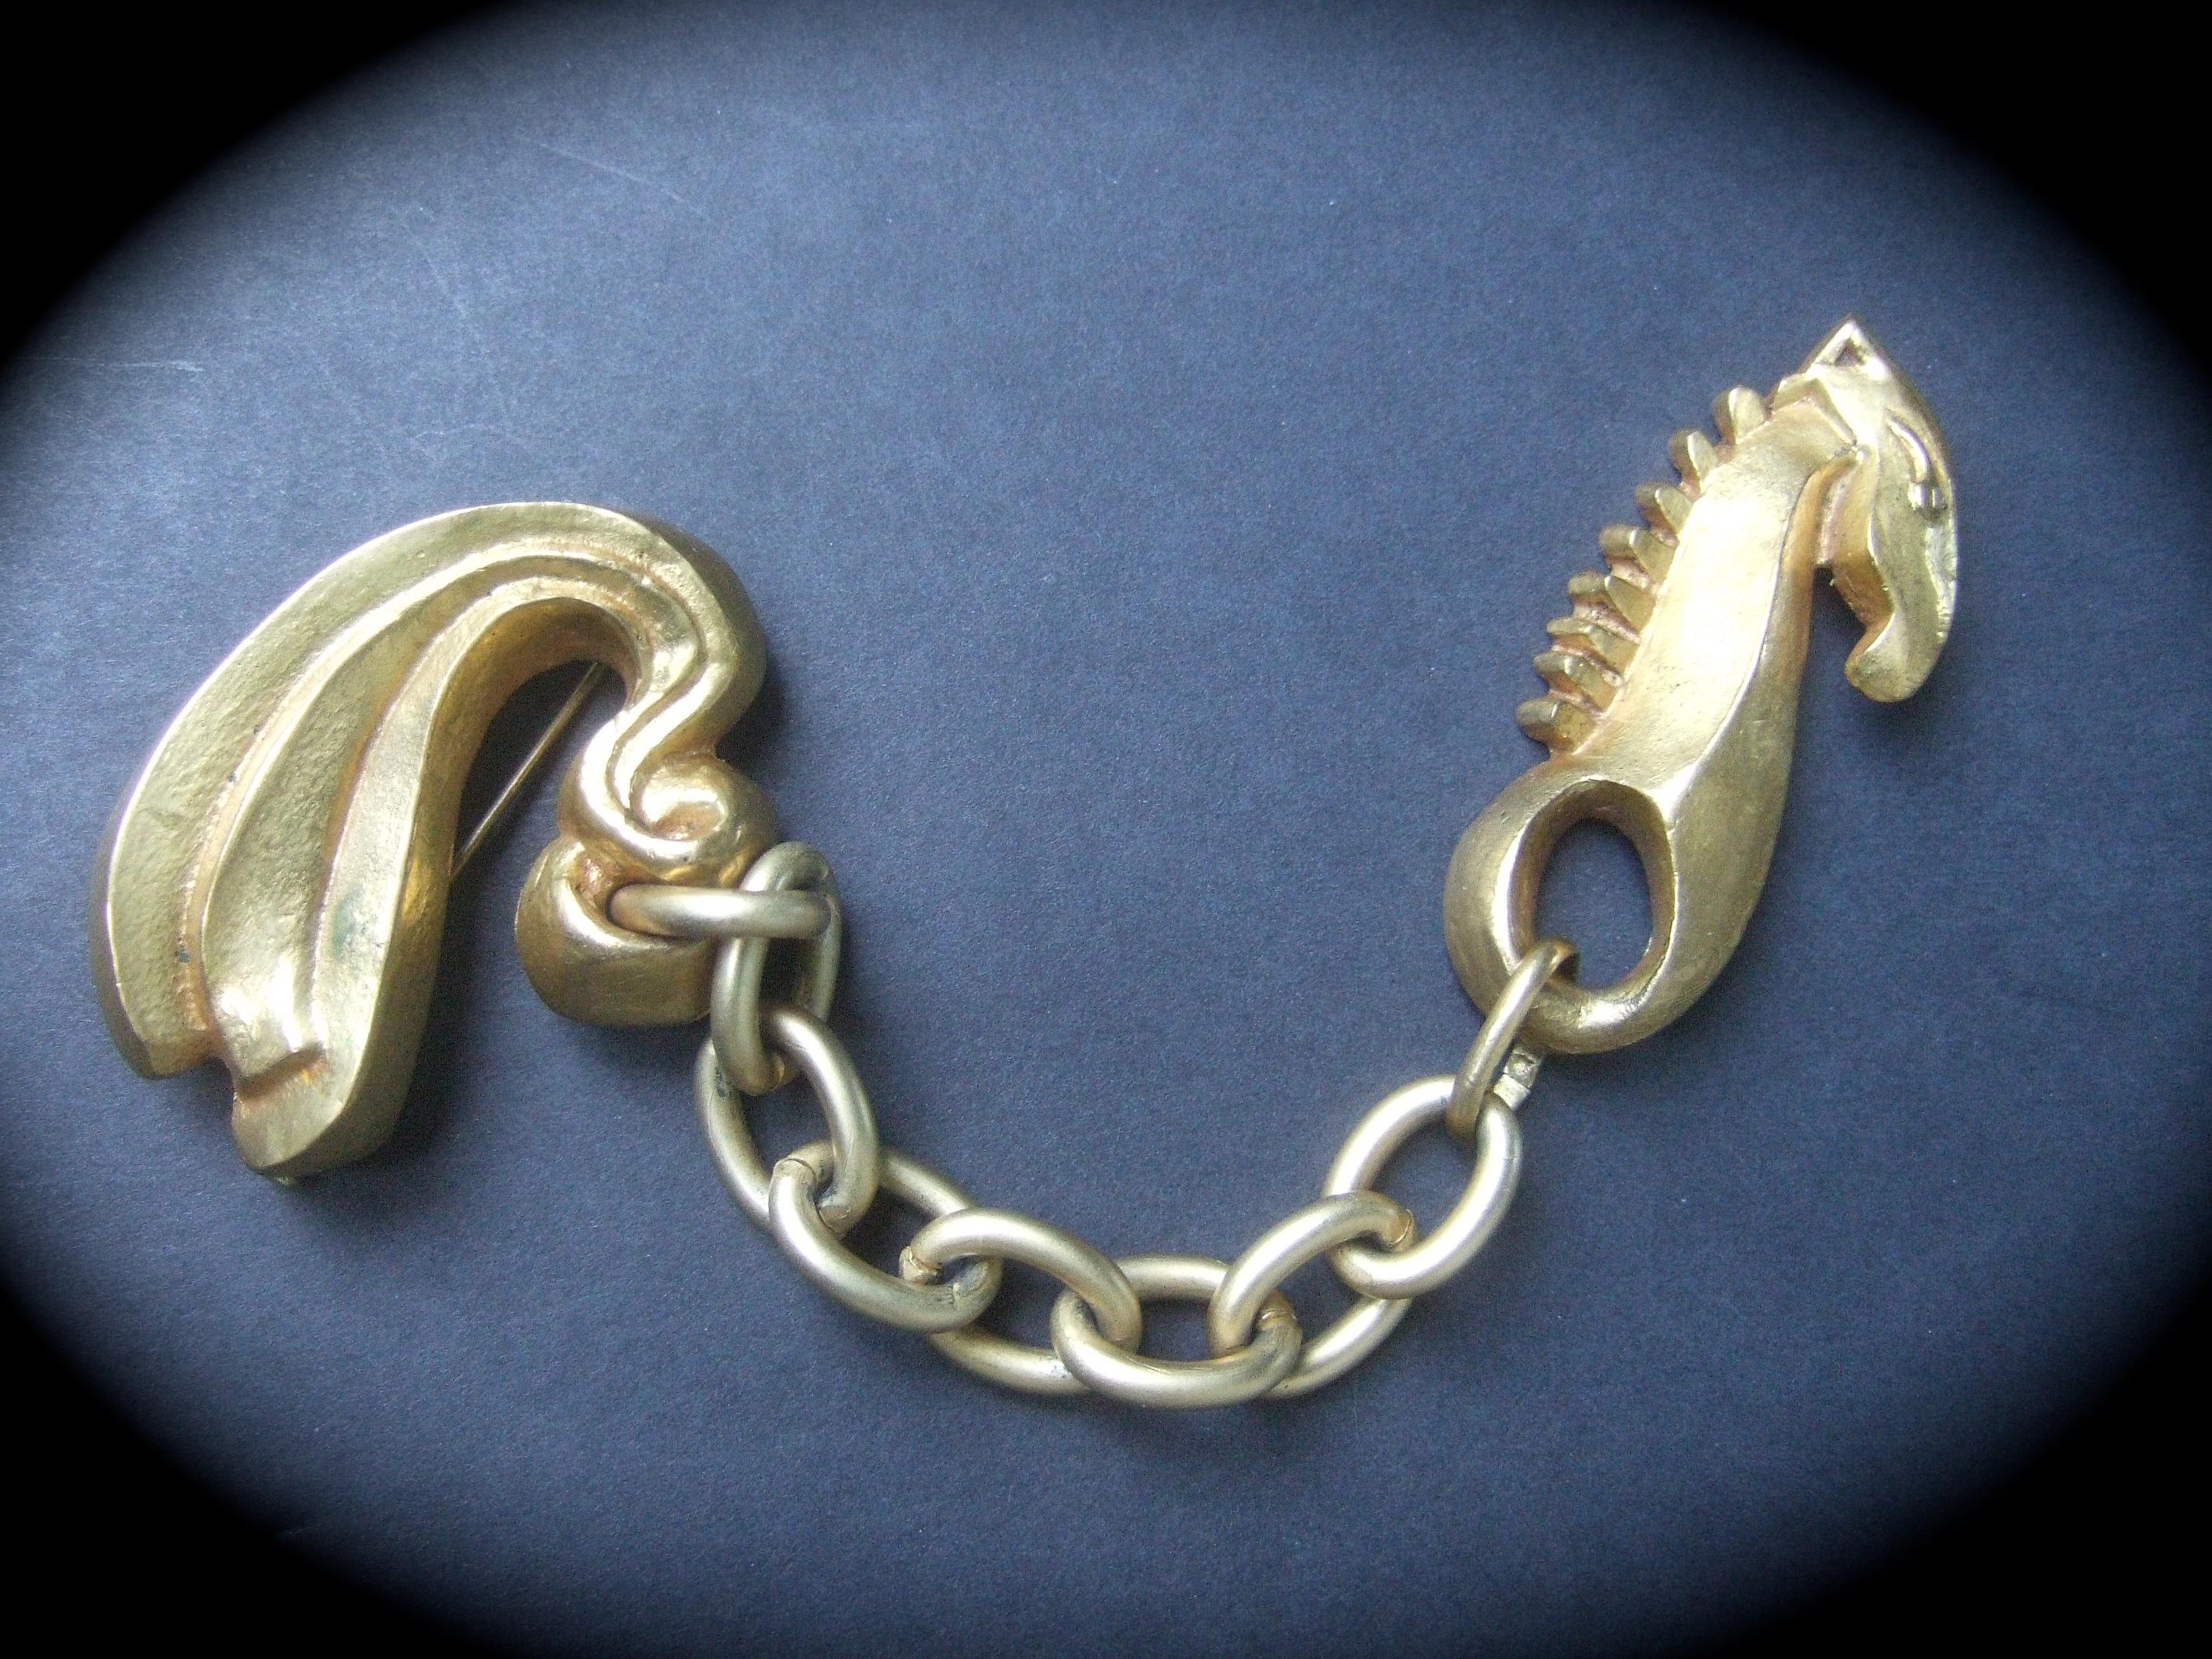 Line Vautrin 1940s Art Deco Articulated Gilt Bronze Seahorse Brooch In Good Condition For Sale In University City, MO